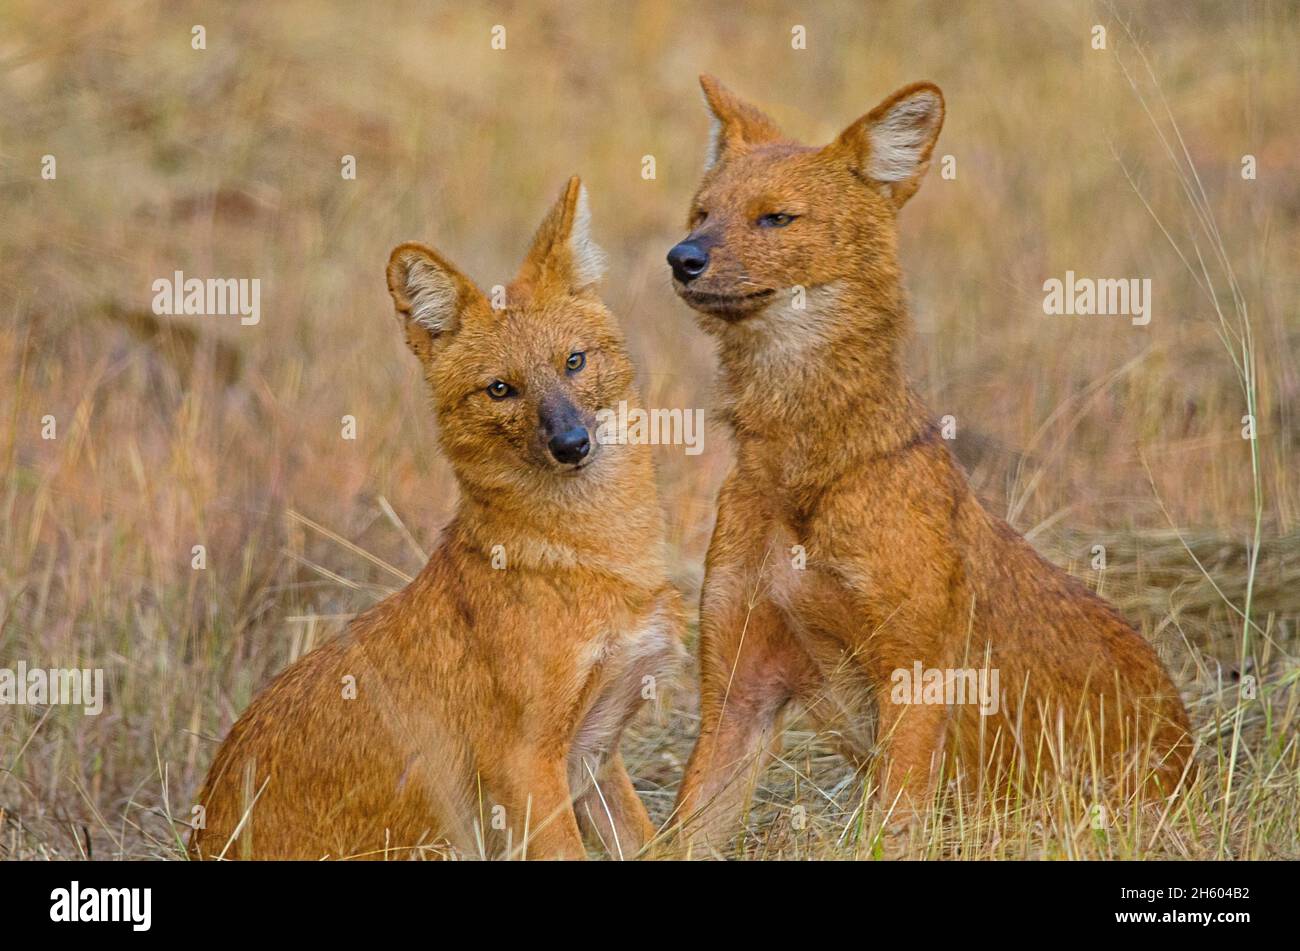 Asiatic wild-dog/Dhole (Cuon alpinus) from central Indian forest Stock Photo